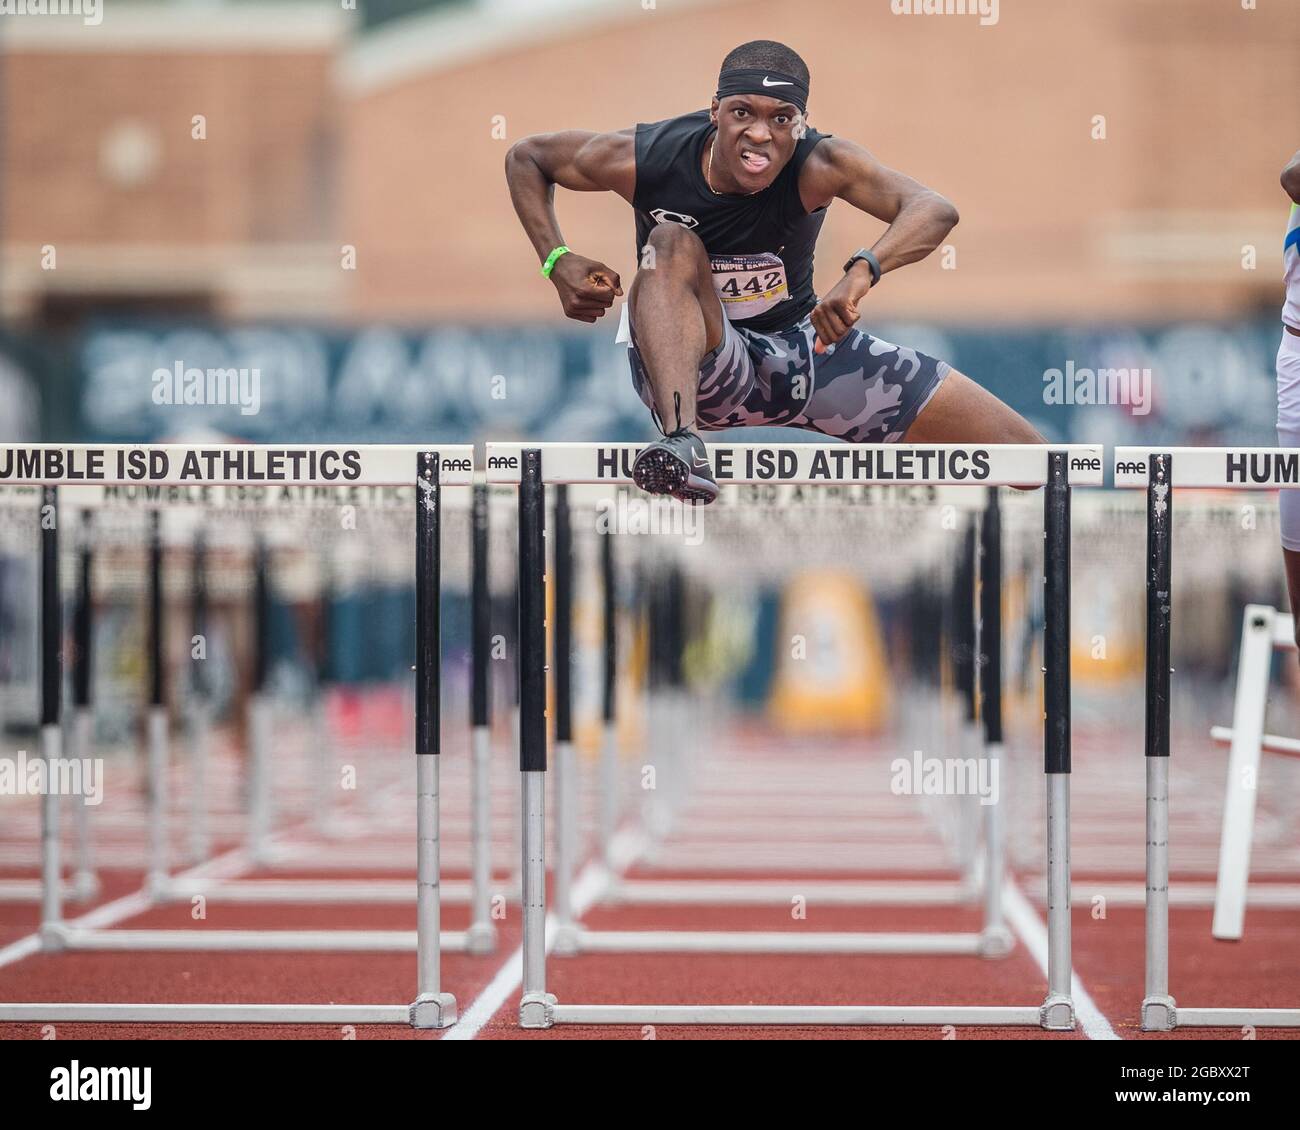 Texas, USA. August 5, 2021: Tamaal Myers competes in the Men's 110 Meter Hurdles 17-18 years old division in the 2021 AAU Junior Olympic Games at George Turner Stadium in Houston, Texas. Prentice C. James/CSM Credit: Cal Sport Media/Alamy Live News Stock Photo